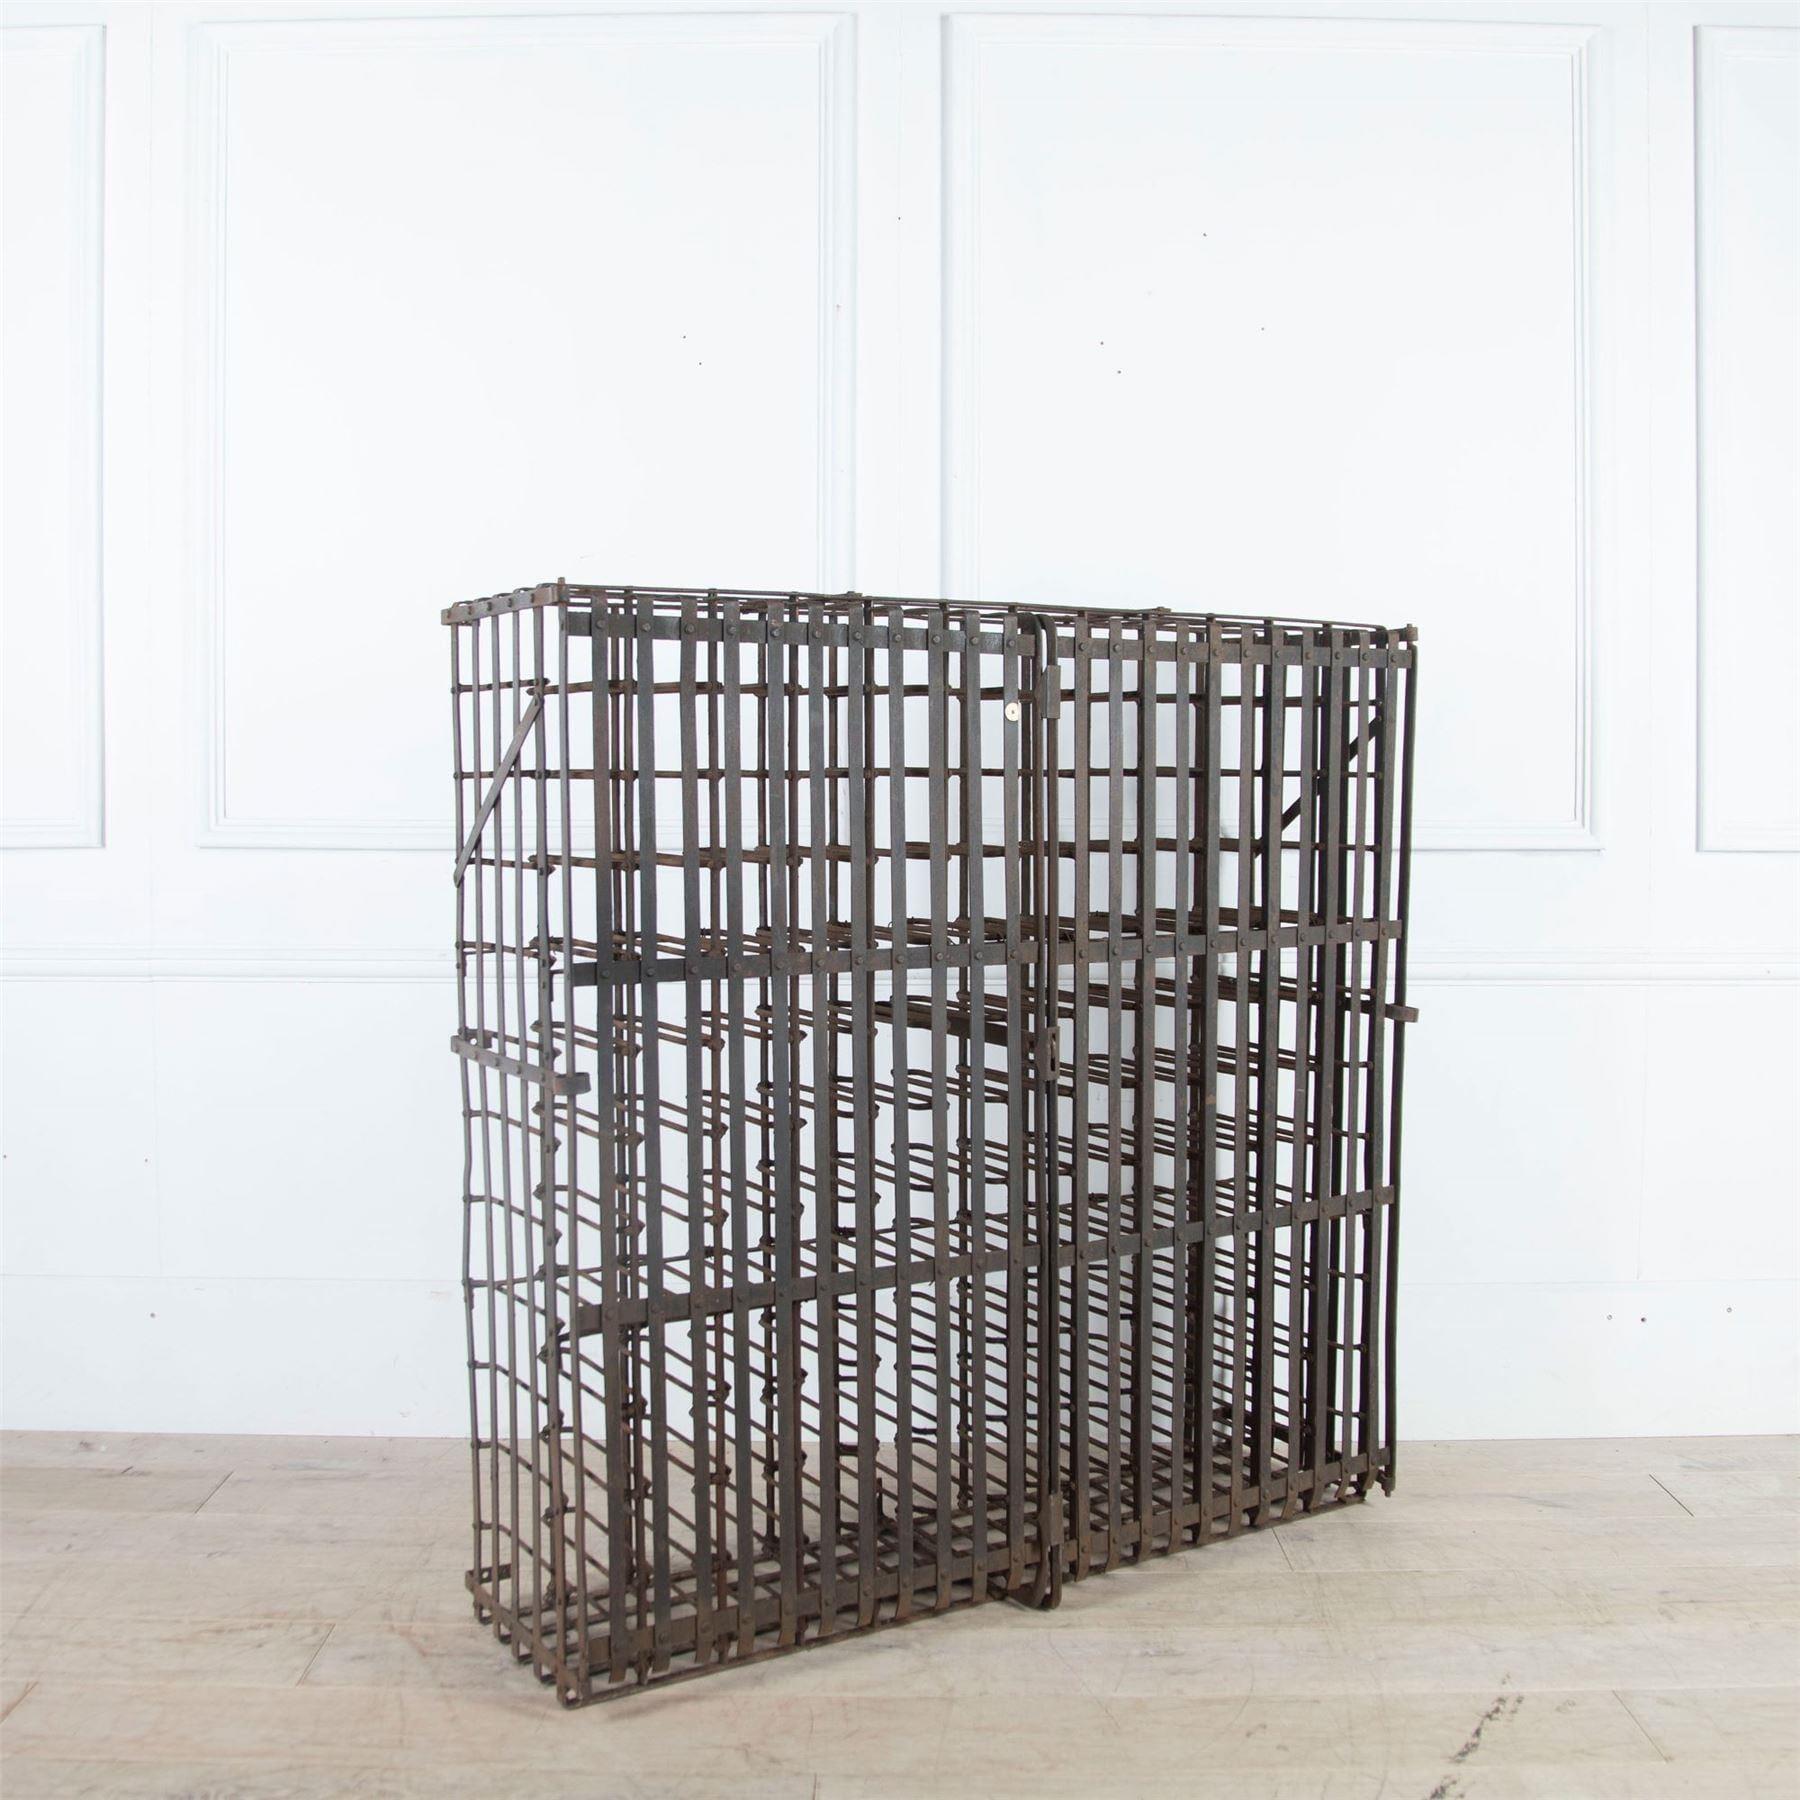 Late 19th century French iron wine cage for 144 bottles, featuring lockable doors, circa 1890, wonderful quality.